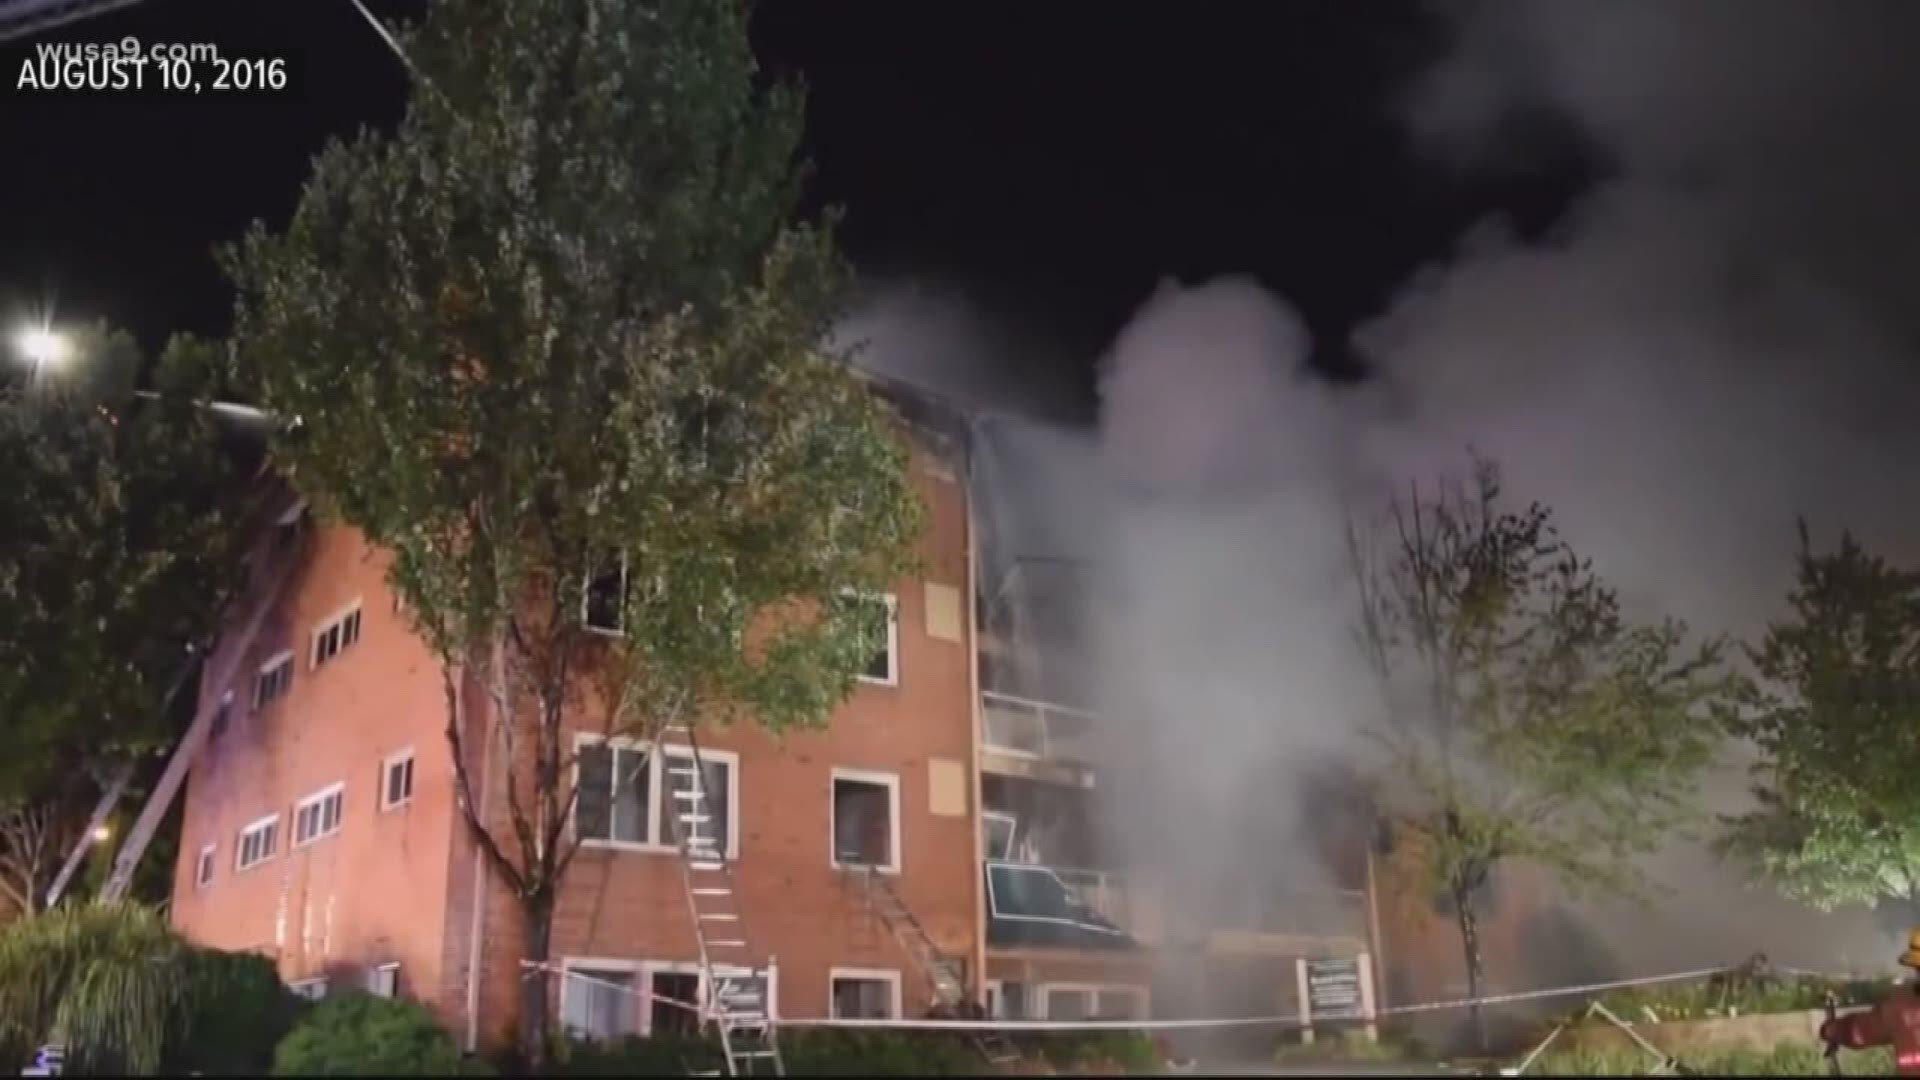 The explosion killed 7 people and injured nearly 70 others at the Flower Branch Apartments.